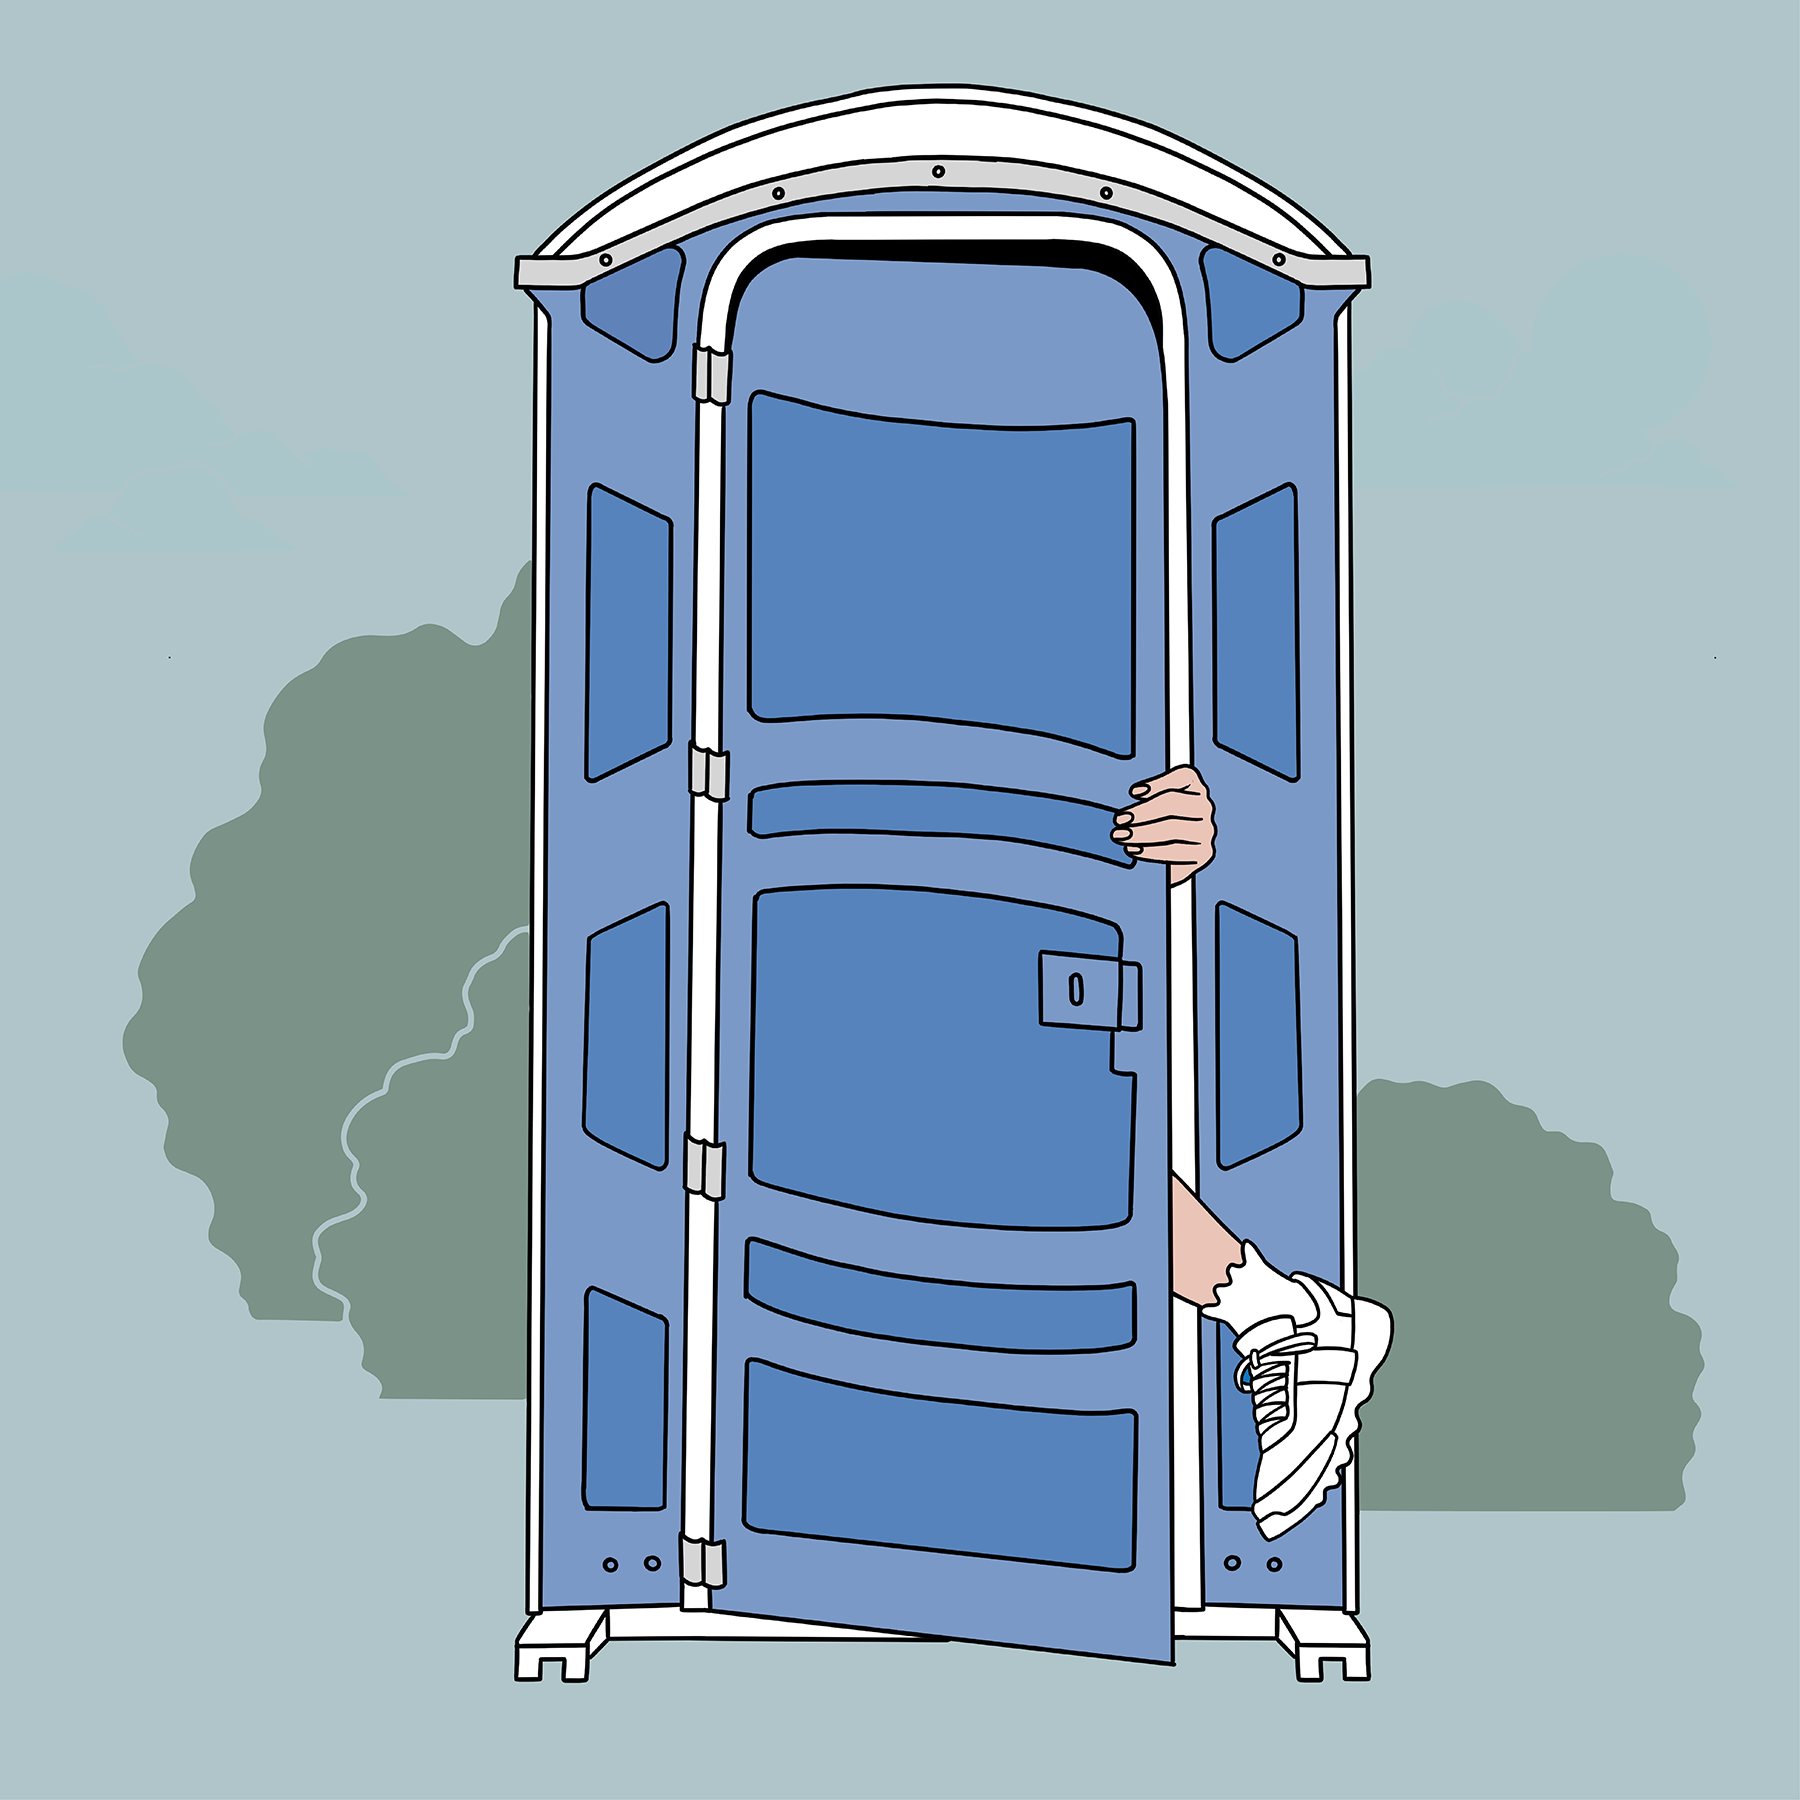 Illustration: A person is seen walking into a porta potty.